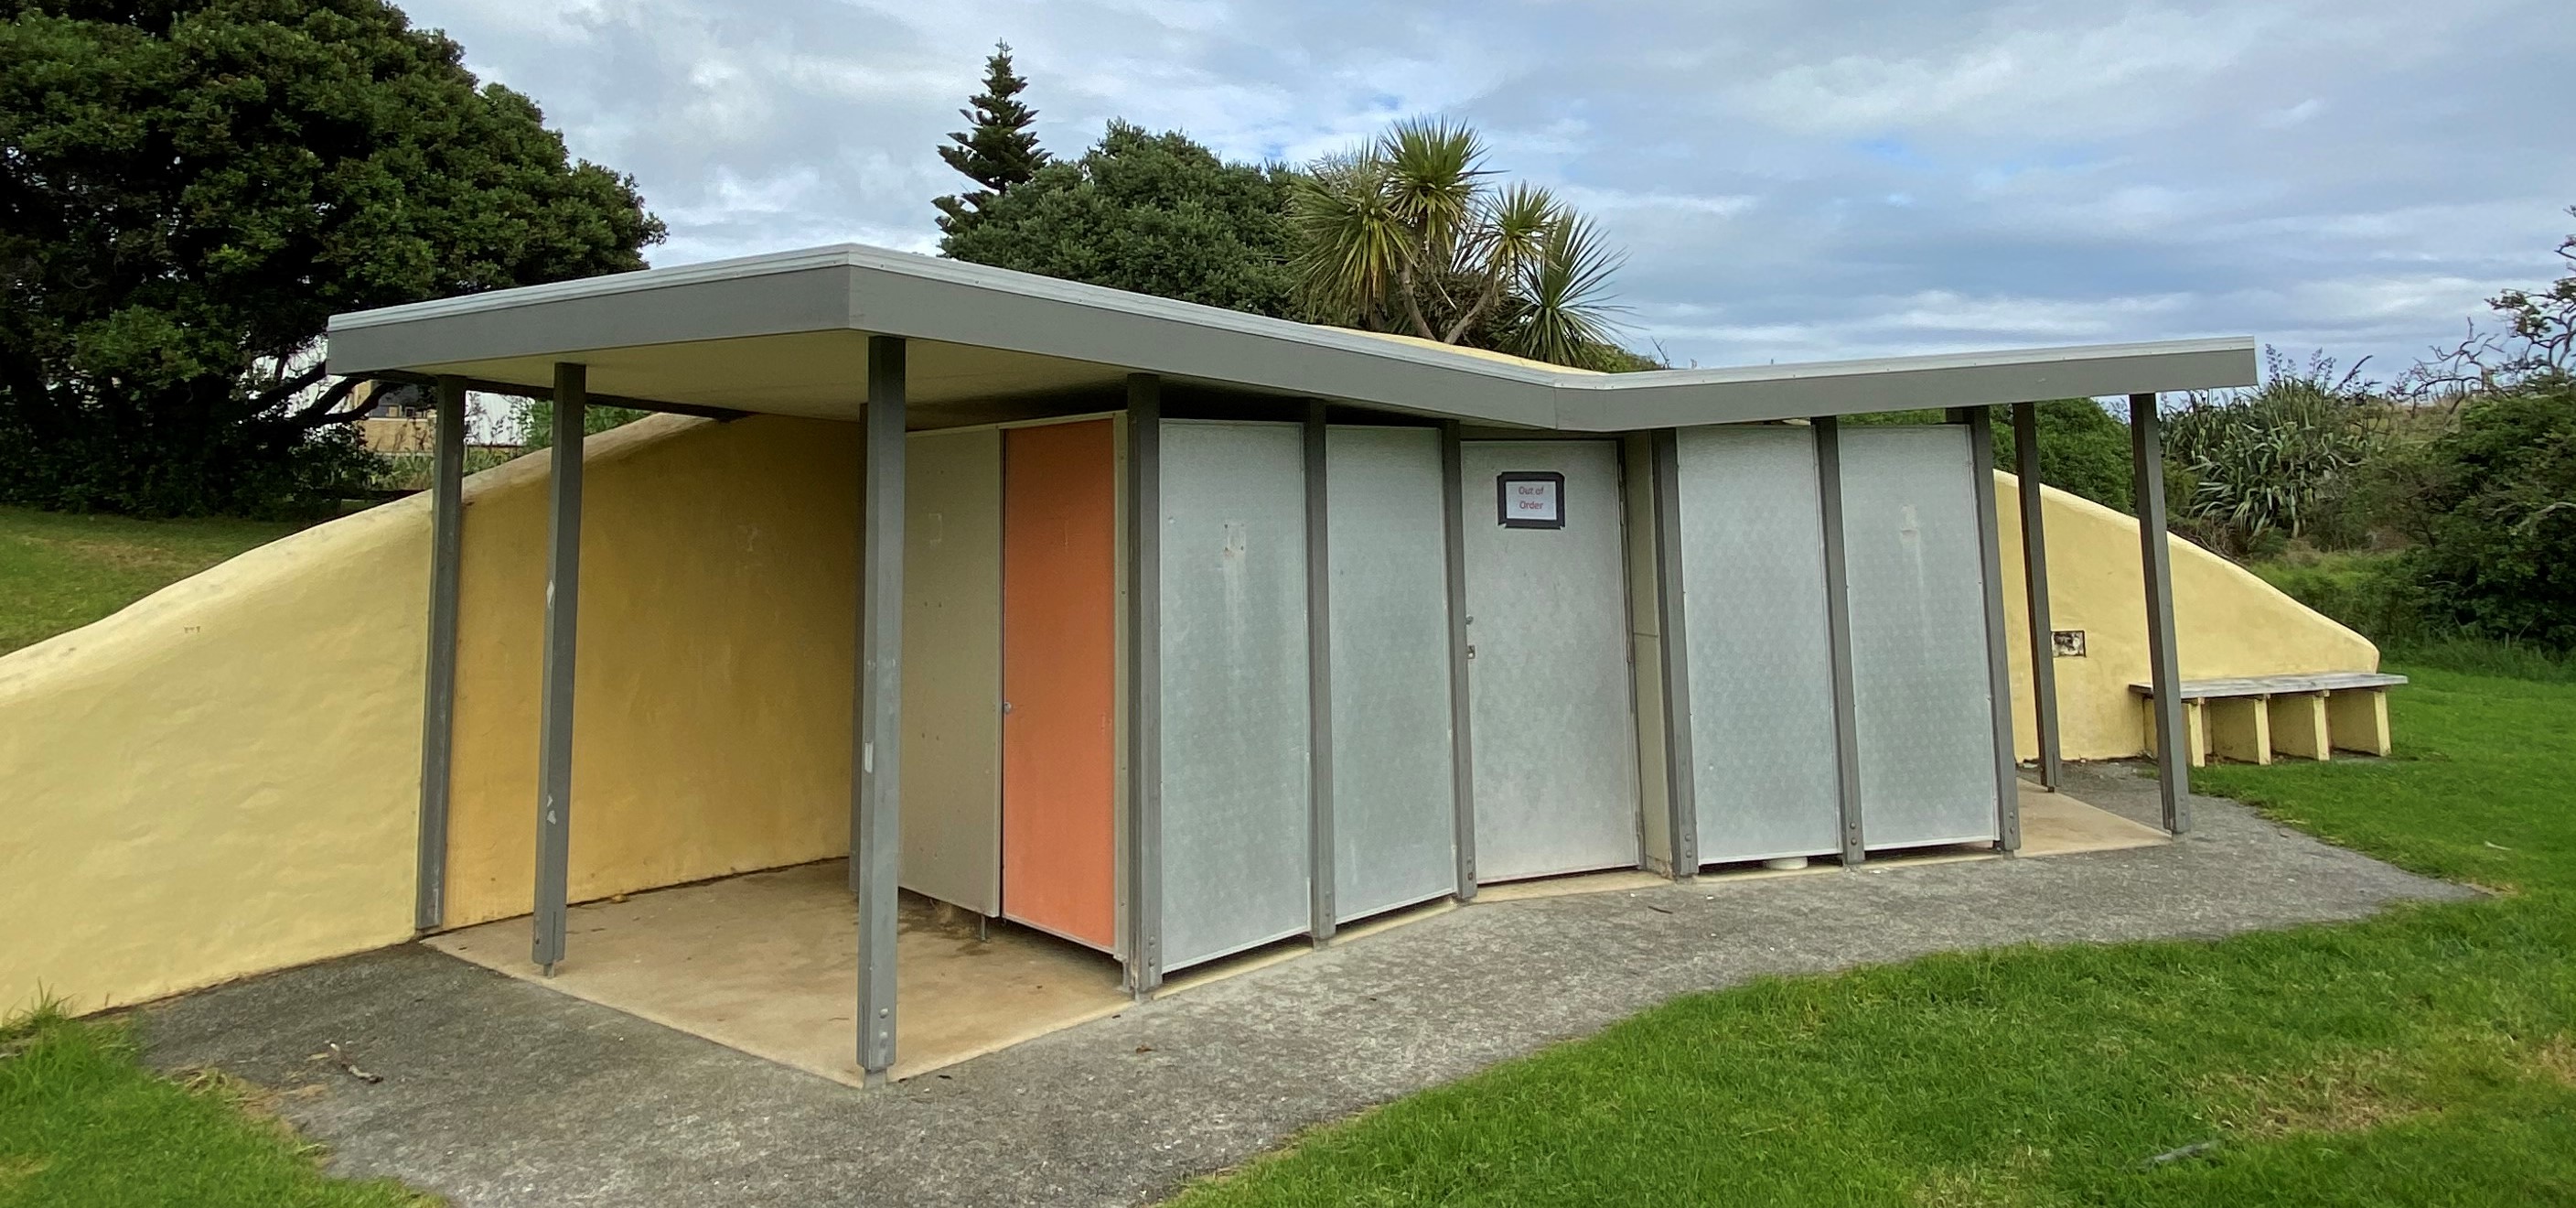 The toilets at the Paekākāriki entrance of QEP which are scheduled to be demolished